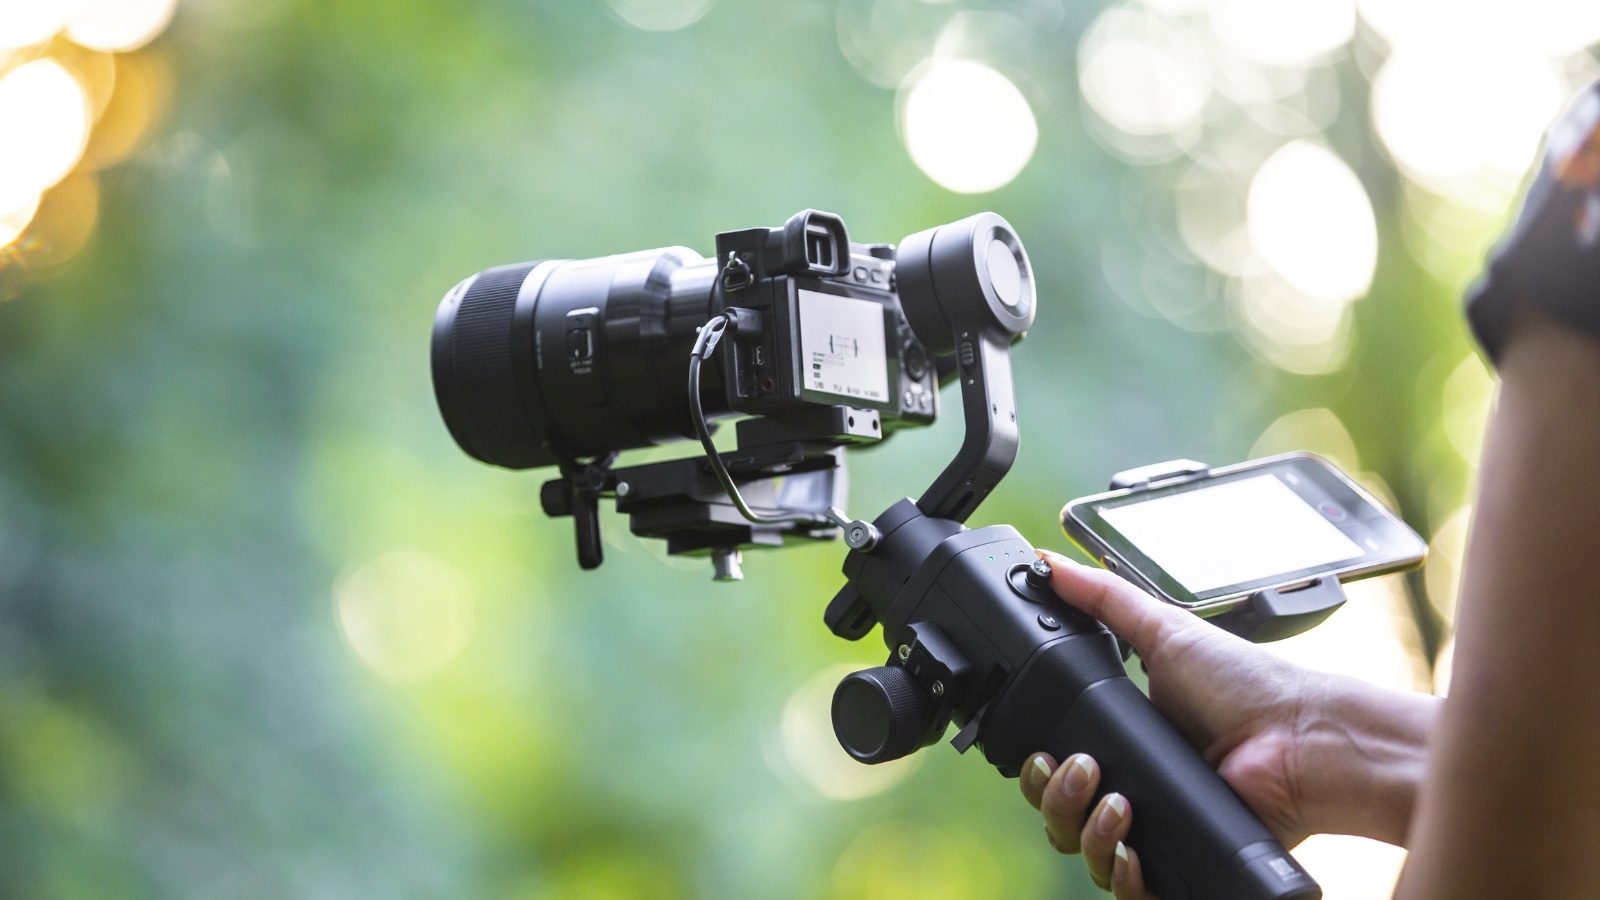 A hand holds up a camera on a gimbal device, pointing in front of a green background of nature